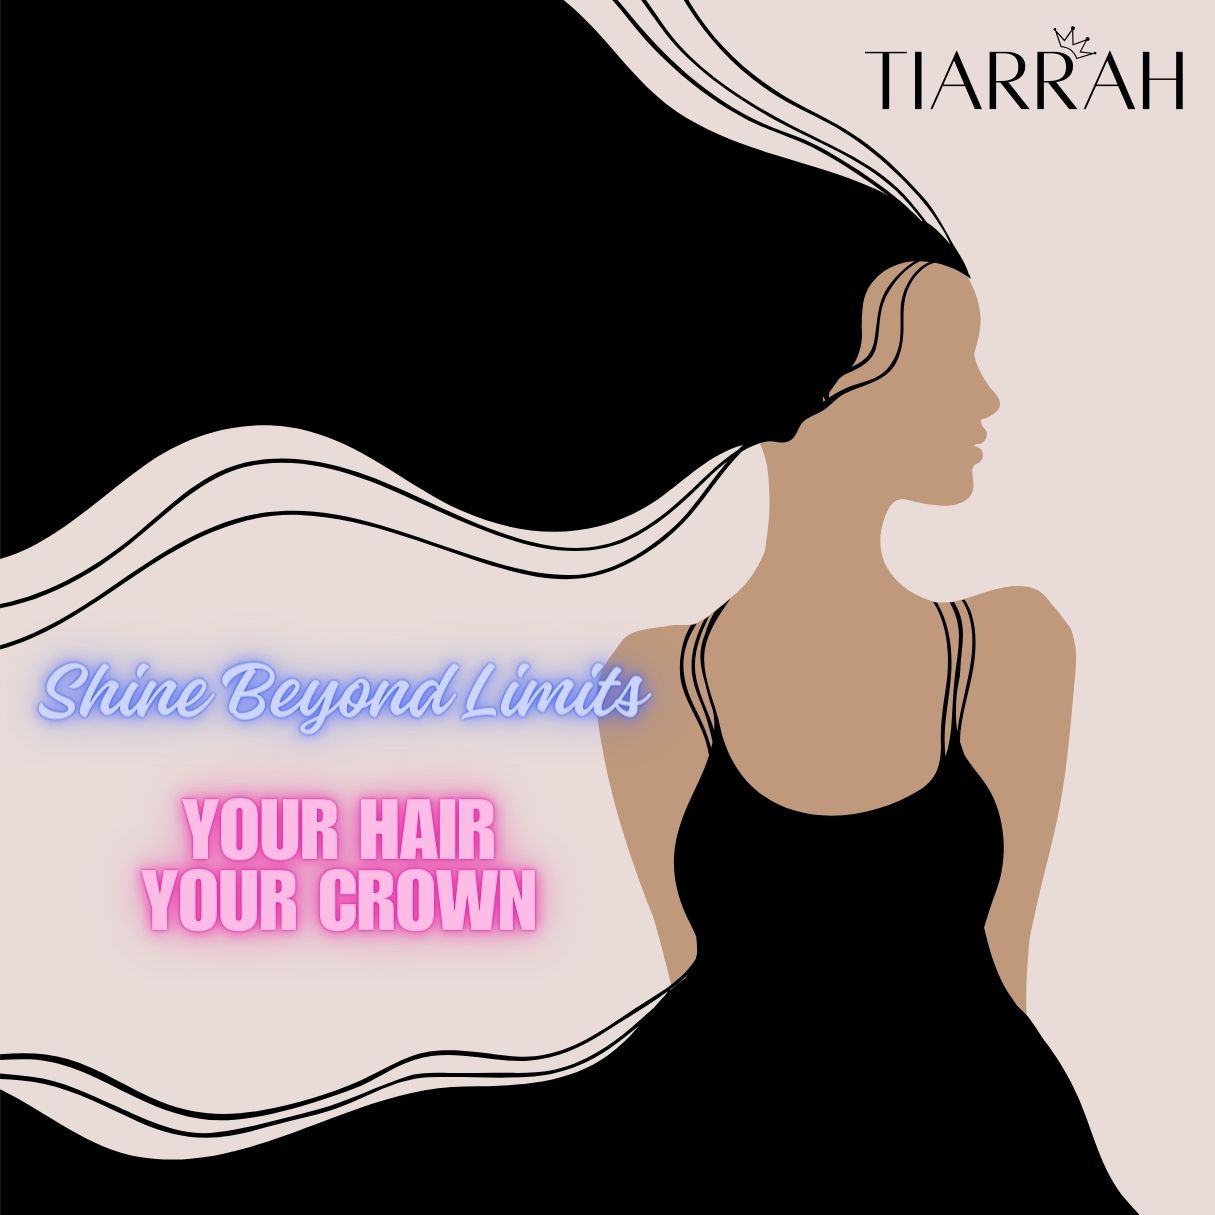 Tiarrah's Tropical Love Hair Conditioner: Natural & Non-Toxic - The Luxury Bath and Body Care Shop